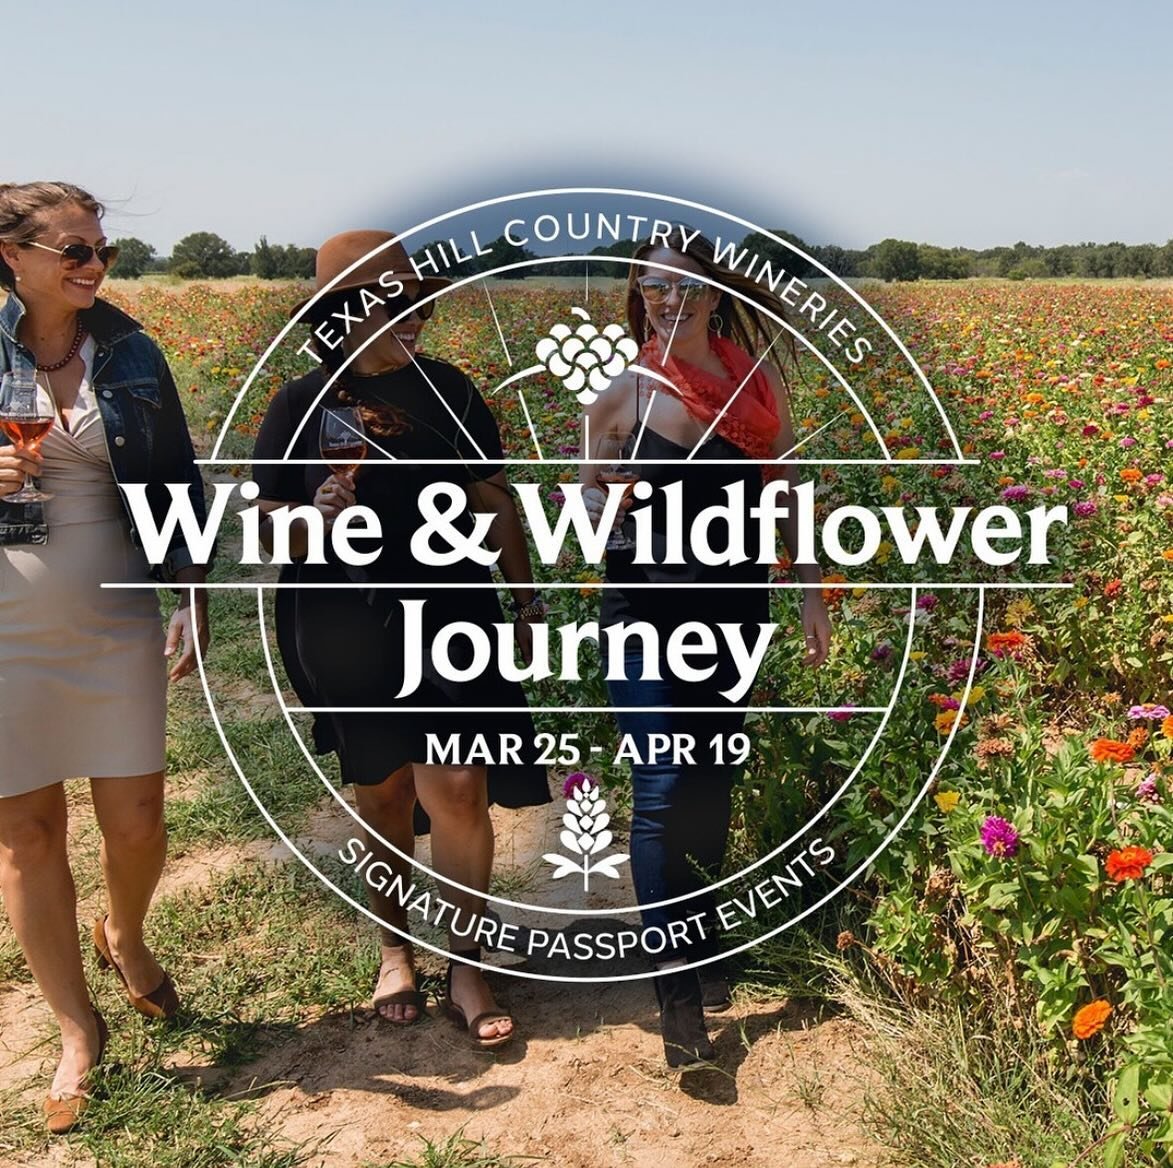 Though the Wine &amp; Wildflower passport Journey started TODAY - there&rsquo;s still time to get tickets and enjoy all the benefits of this self-guided tour through the wineries of the Texas Hill Country, with a stop or two to frolick in the wildflo